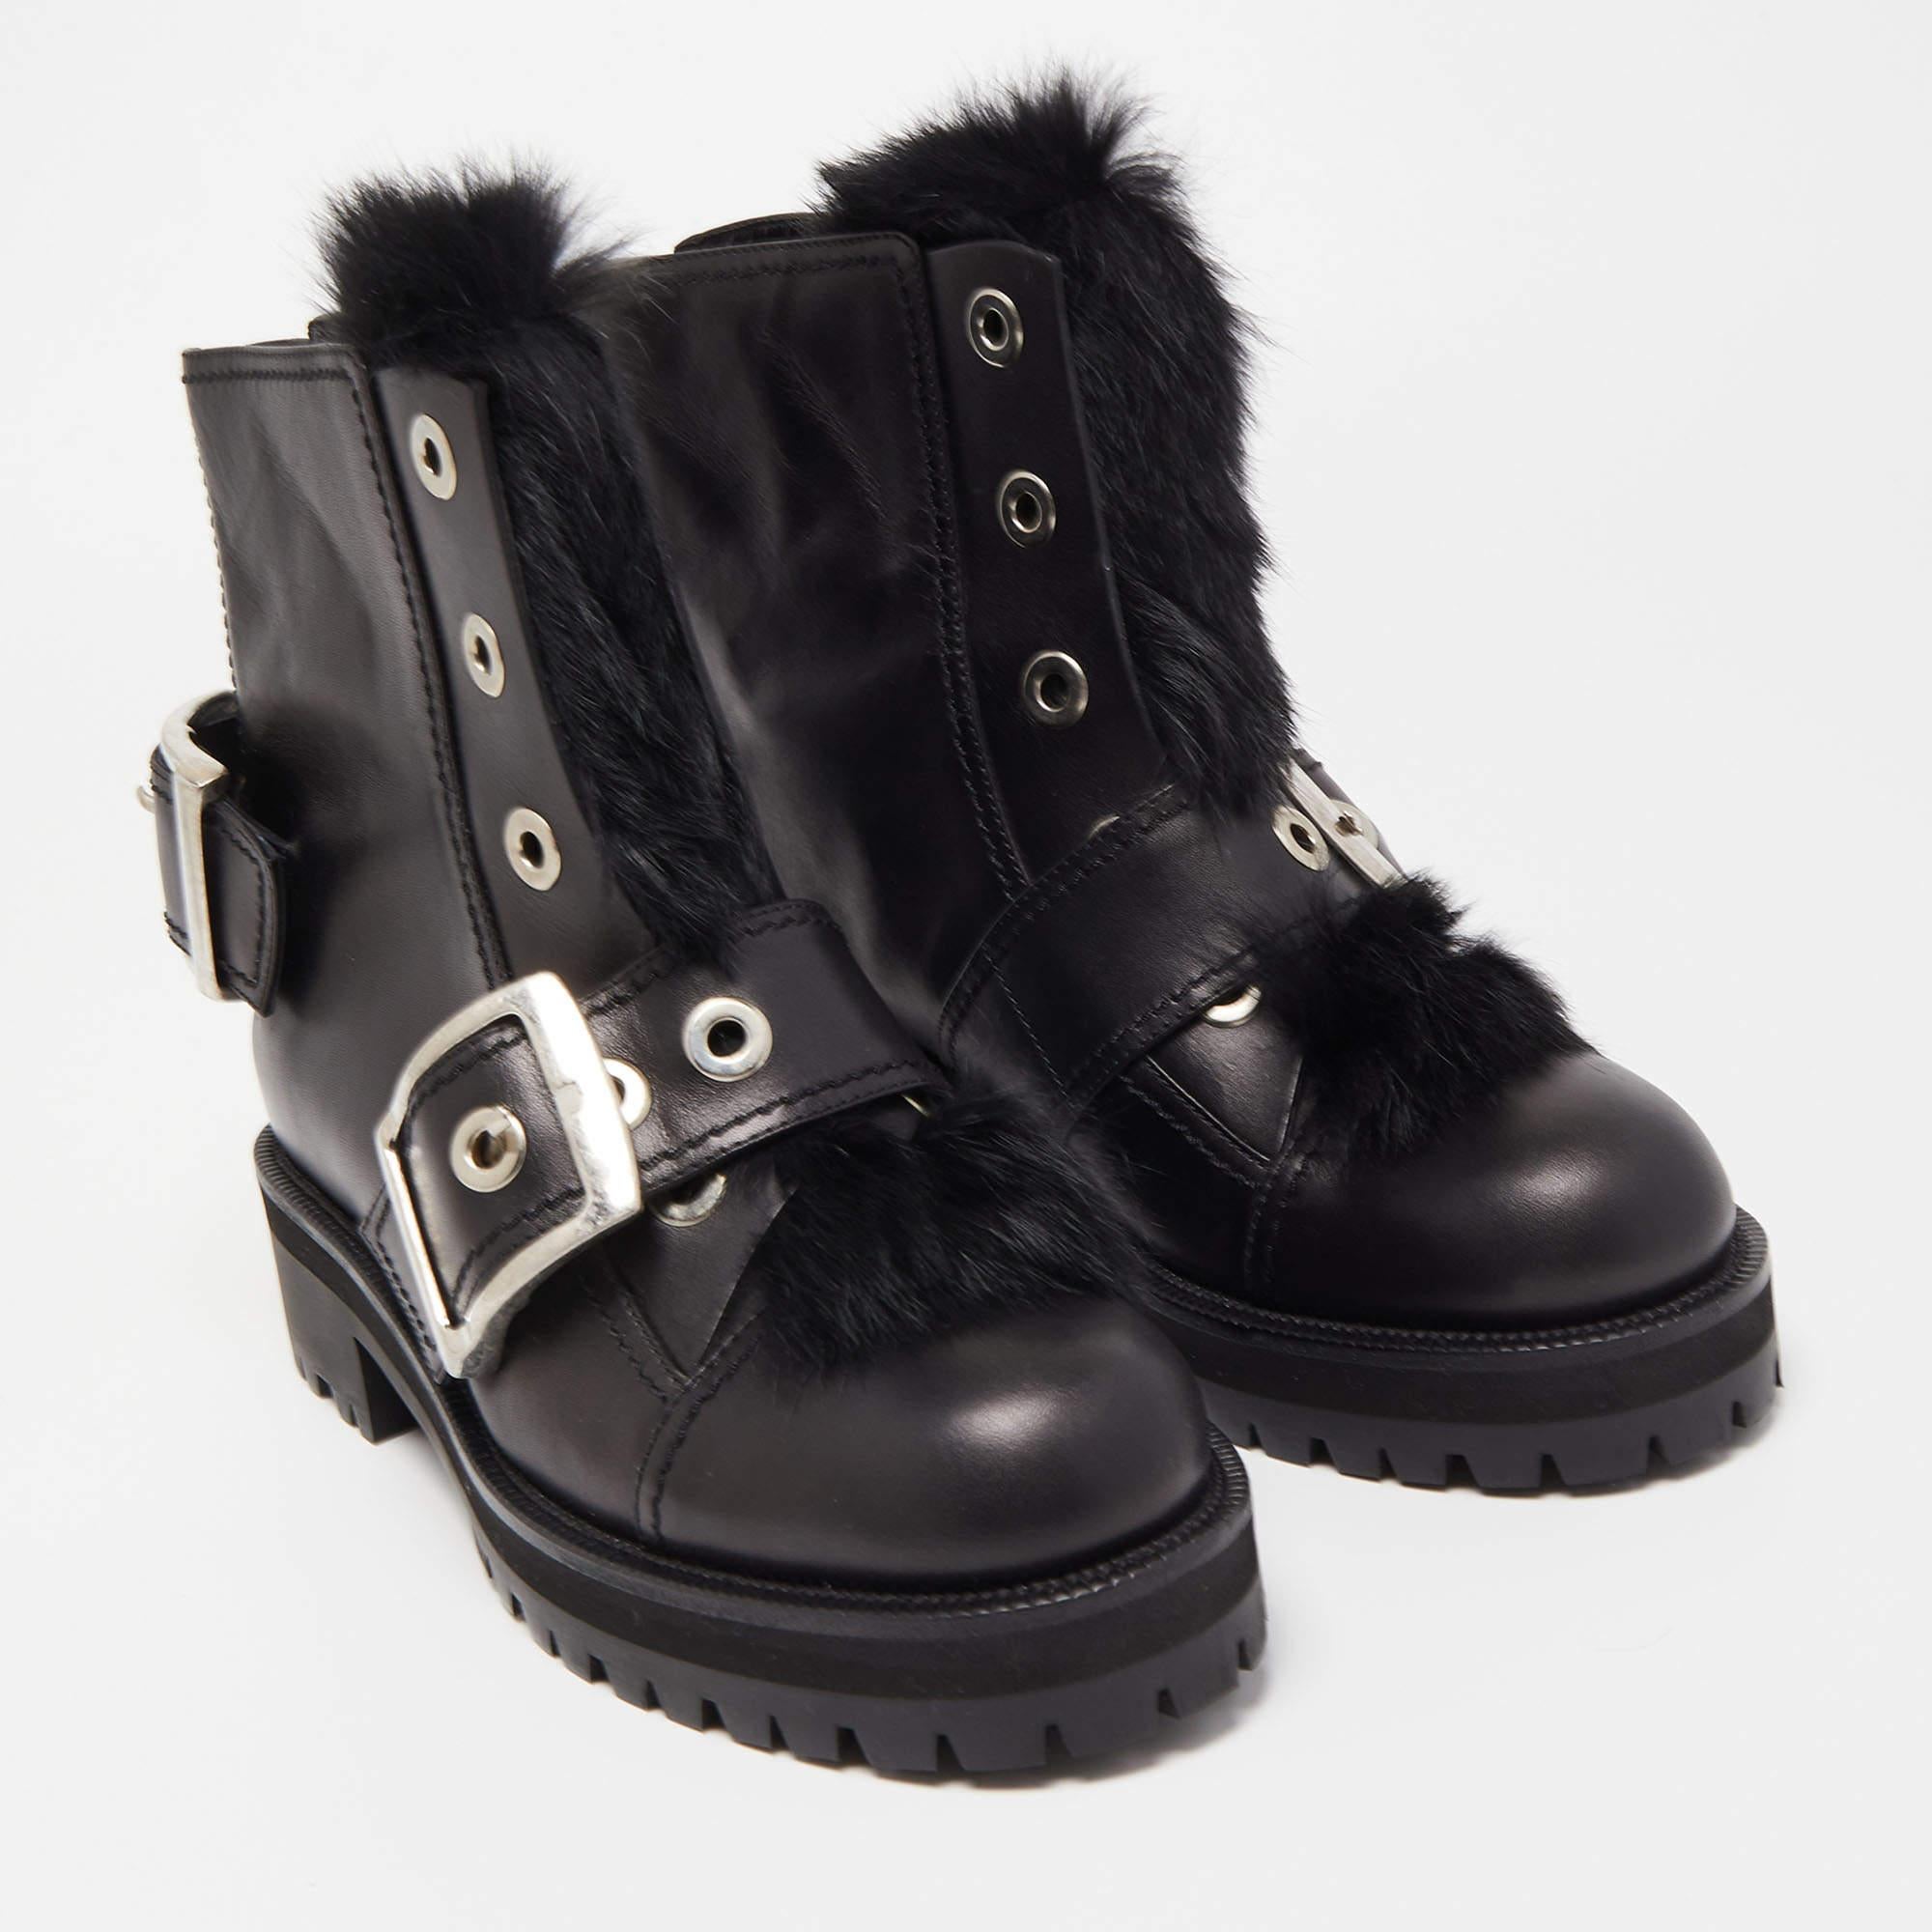 Women's Alexander McQueen Black Leather and Fur Buckle Detail Ankle Boots 